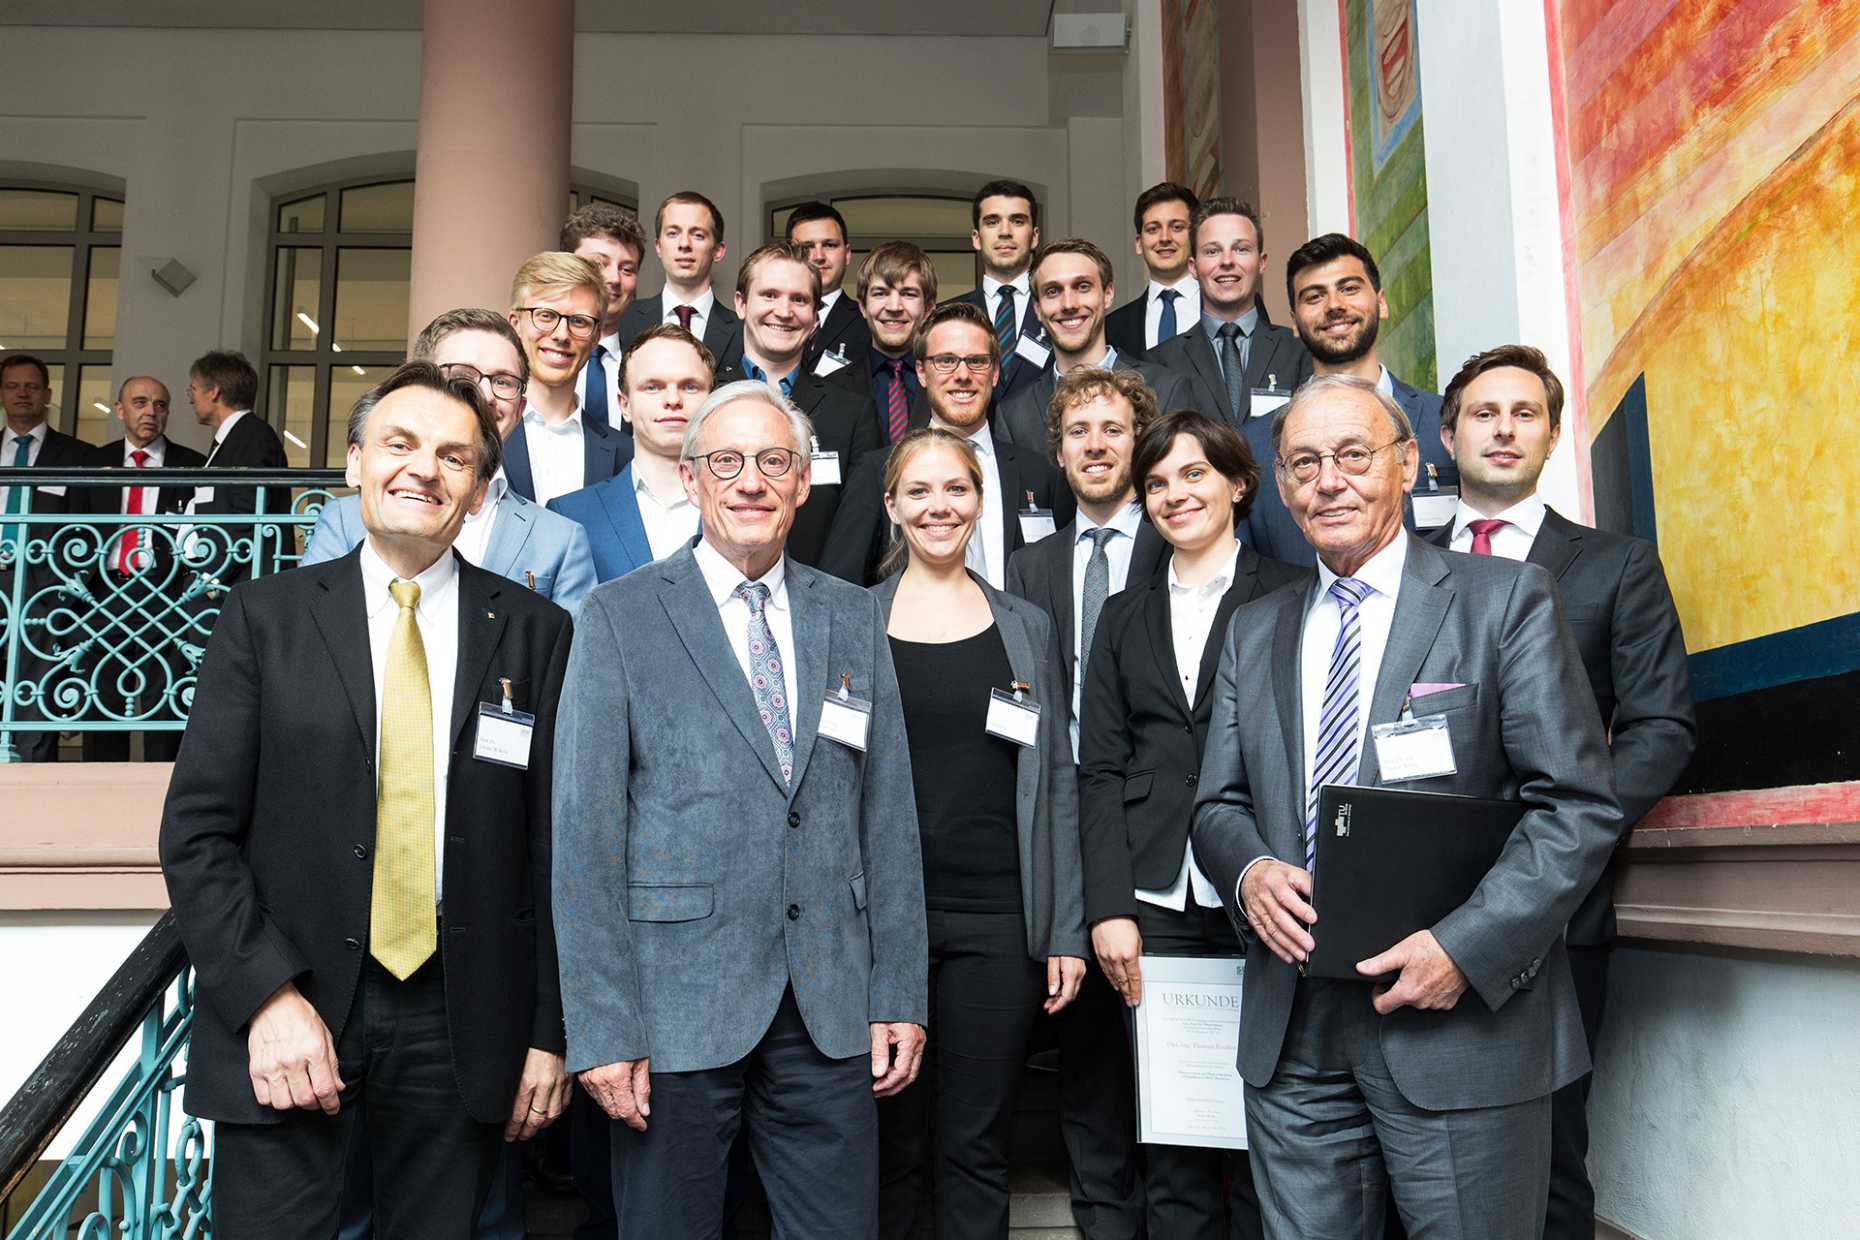 Ceremony for the "SEW-Eurodrive-Stiftung" Award and our former Masterstudent Pietro Rossi